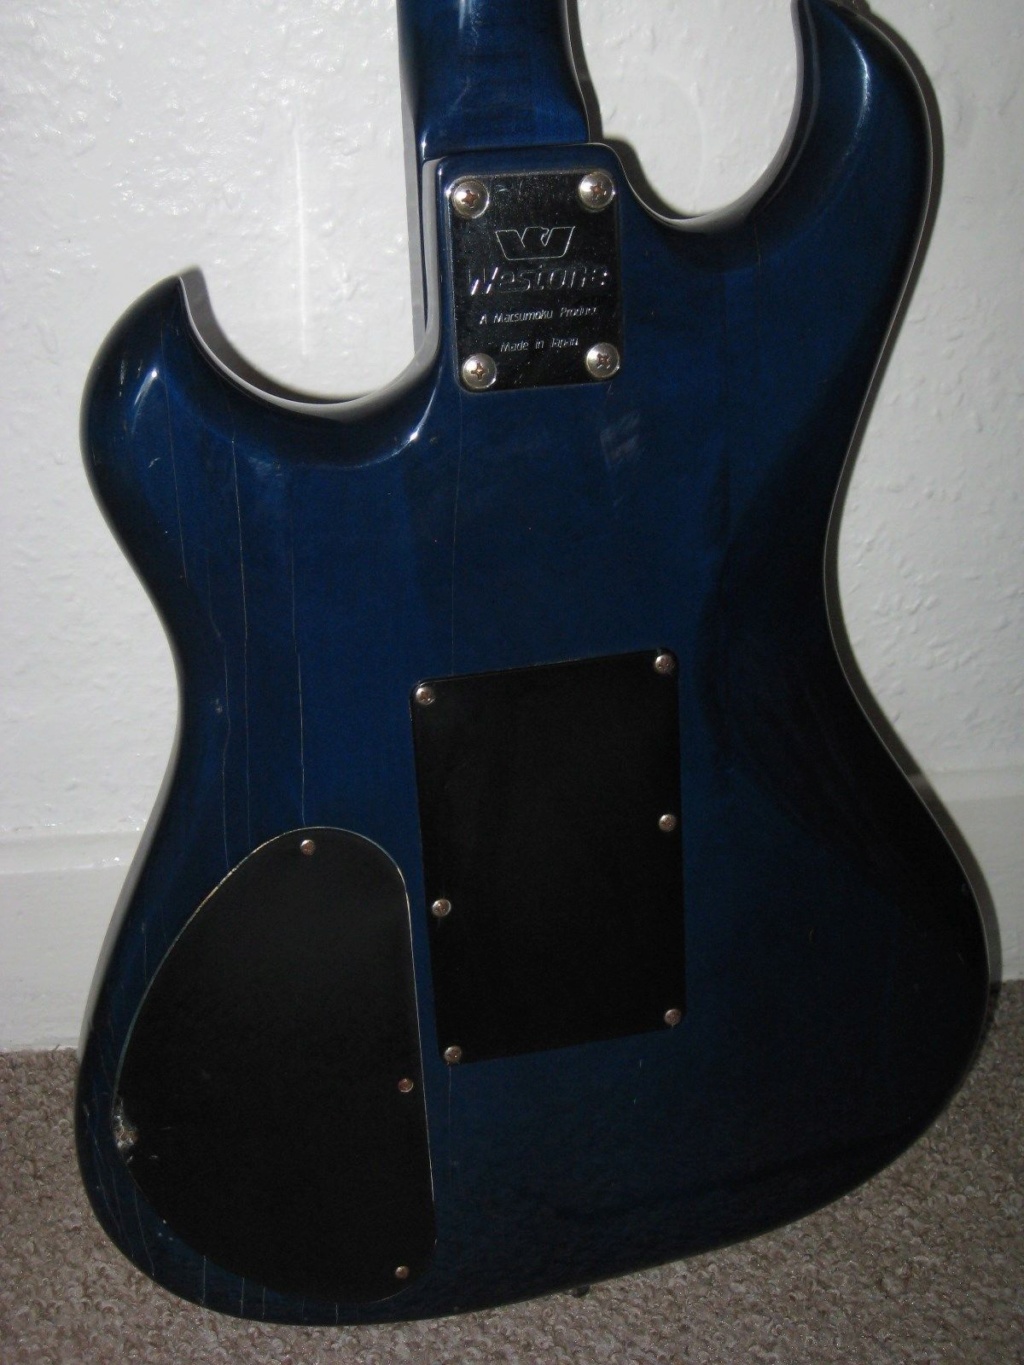 New Project Spectrum MX Pickups, Wiring and Cosmetics S-l16010